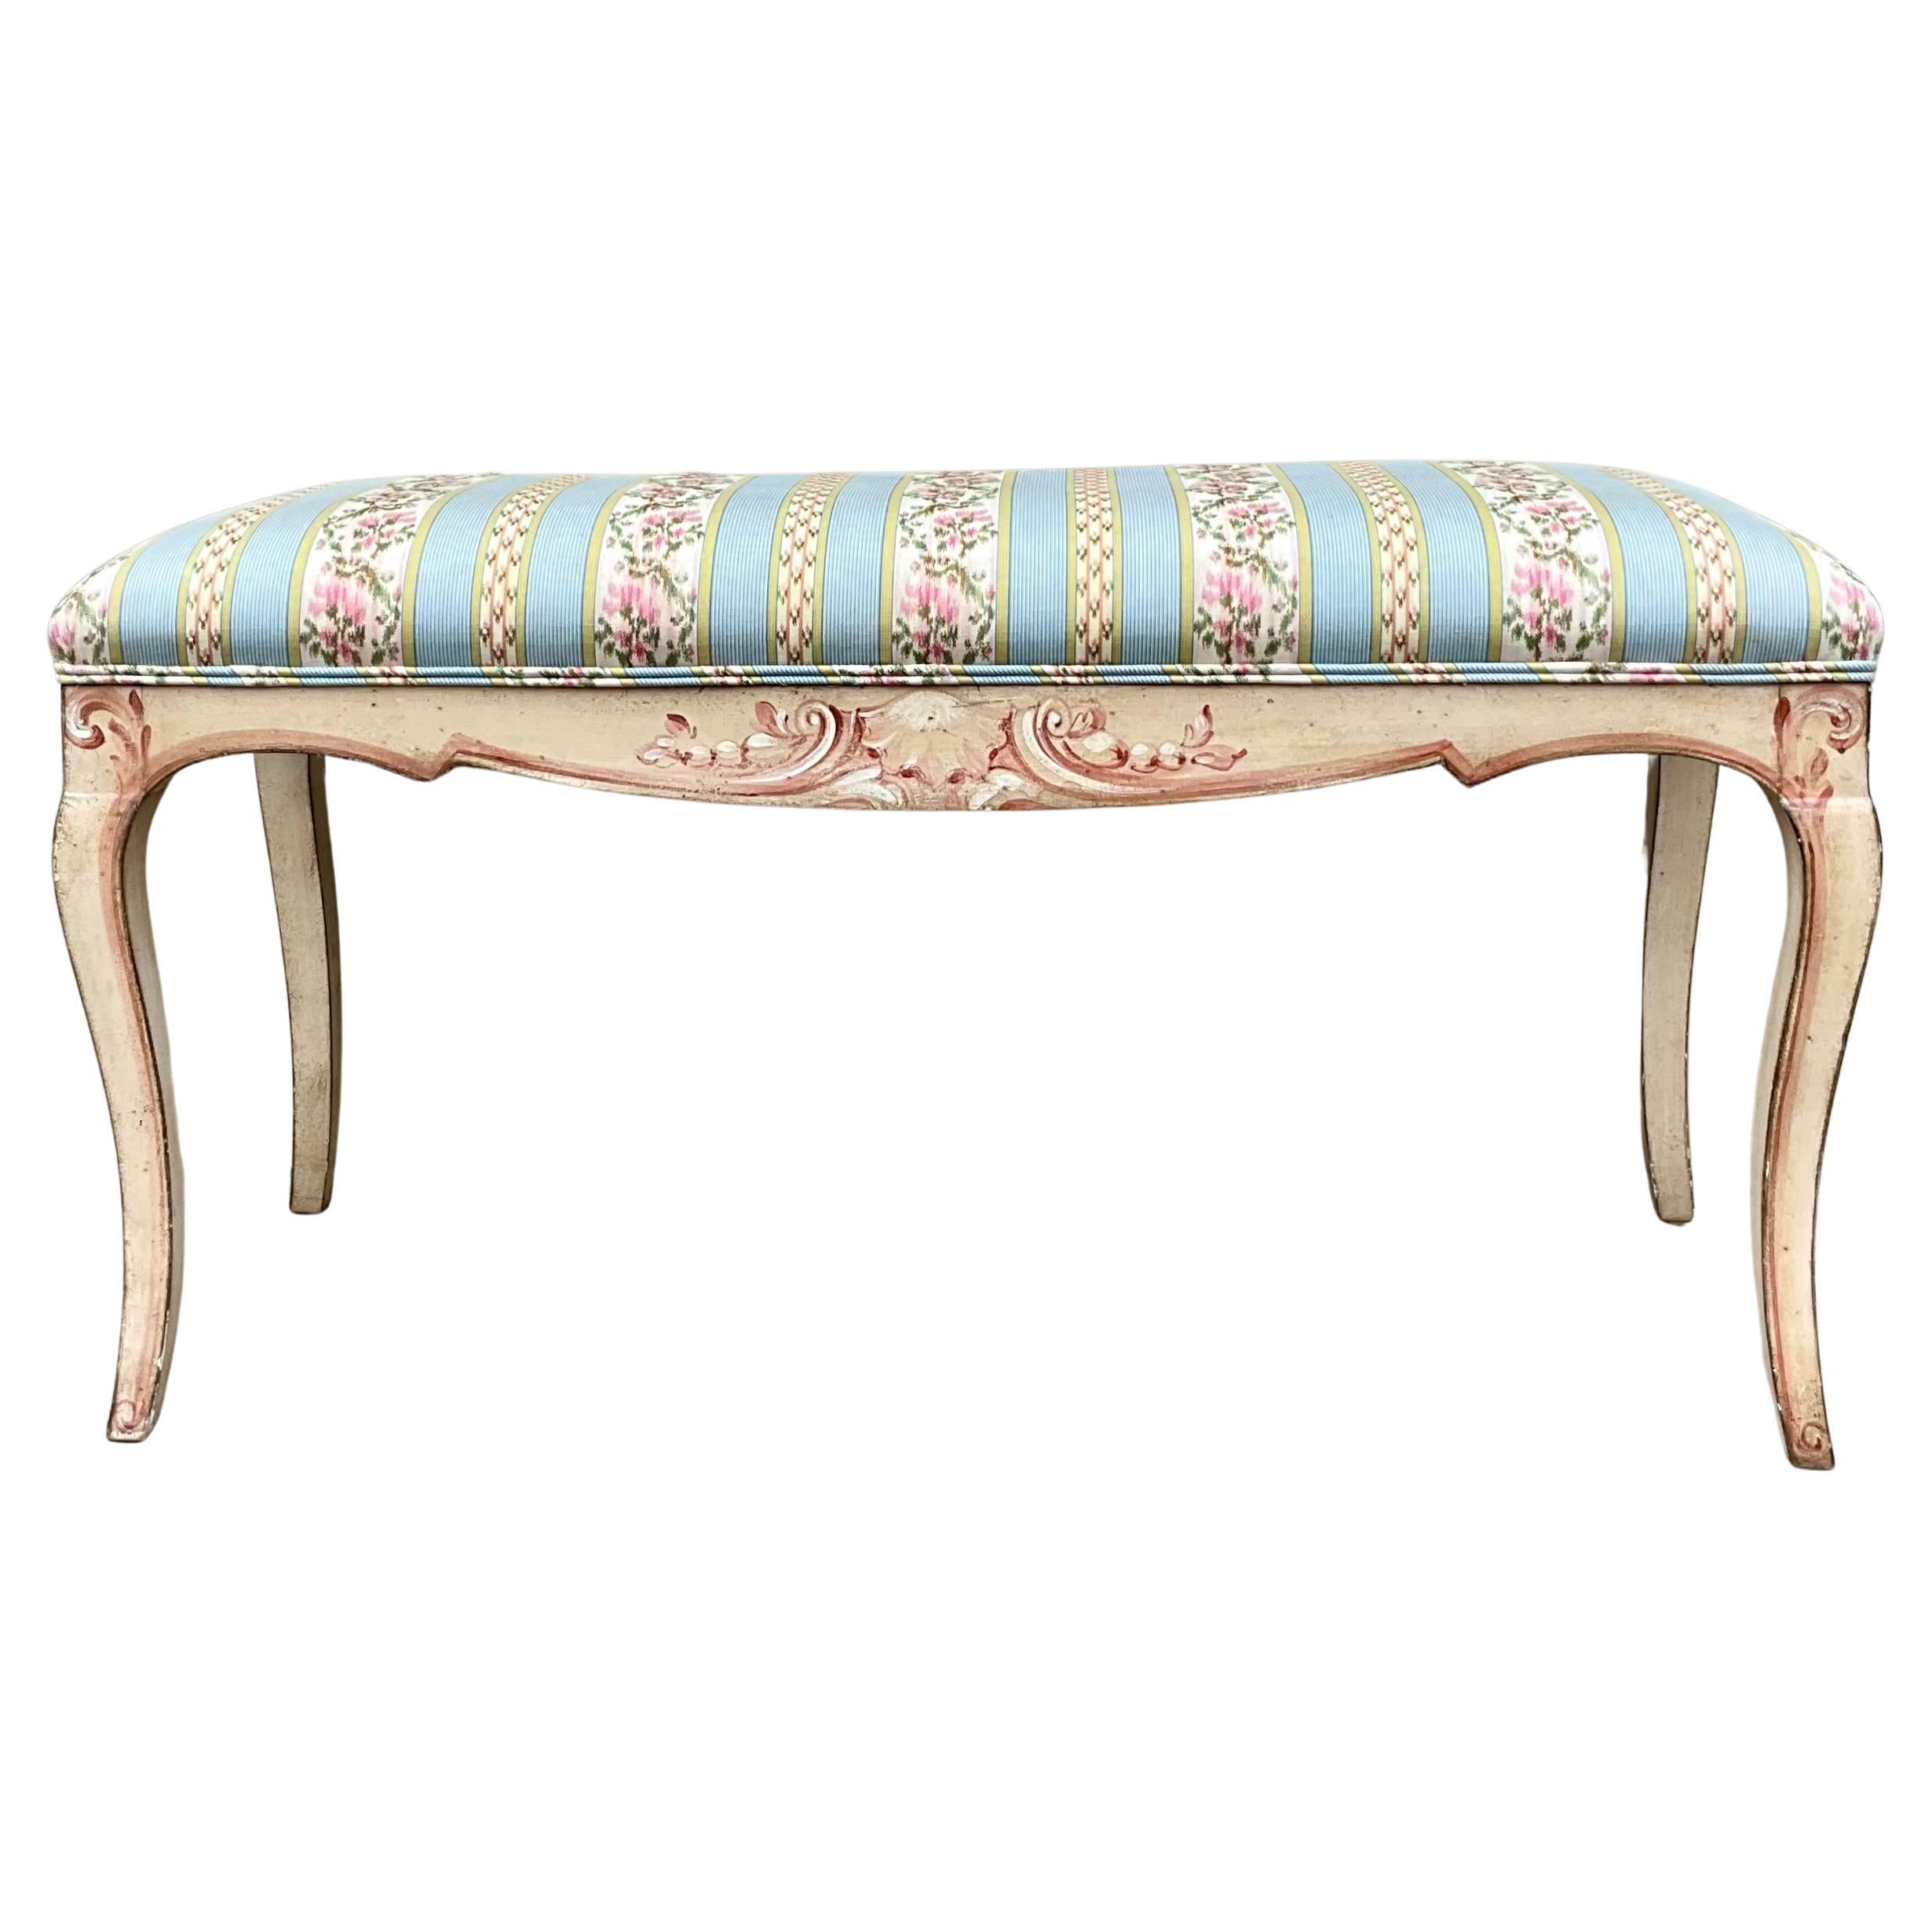 1960s Carved And Painted Italian Bench / Ottoman In Striped Floral Chintz  For Sale